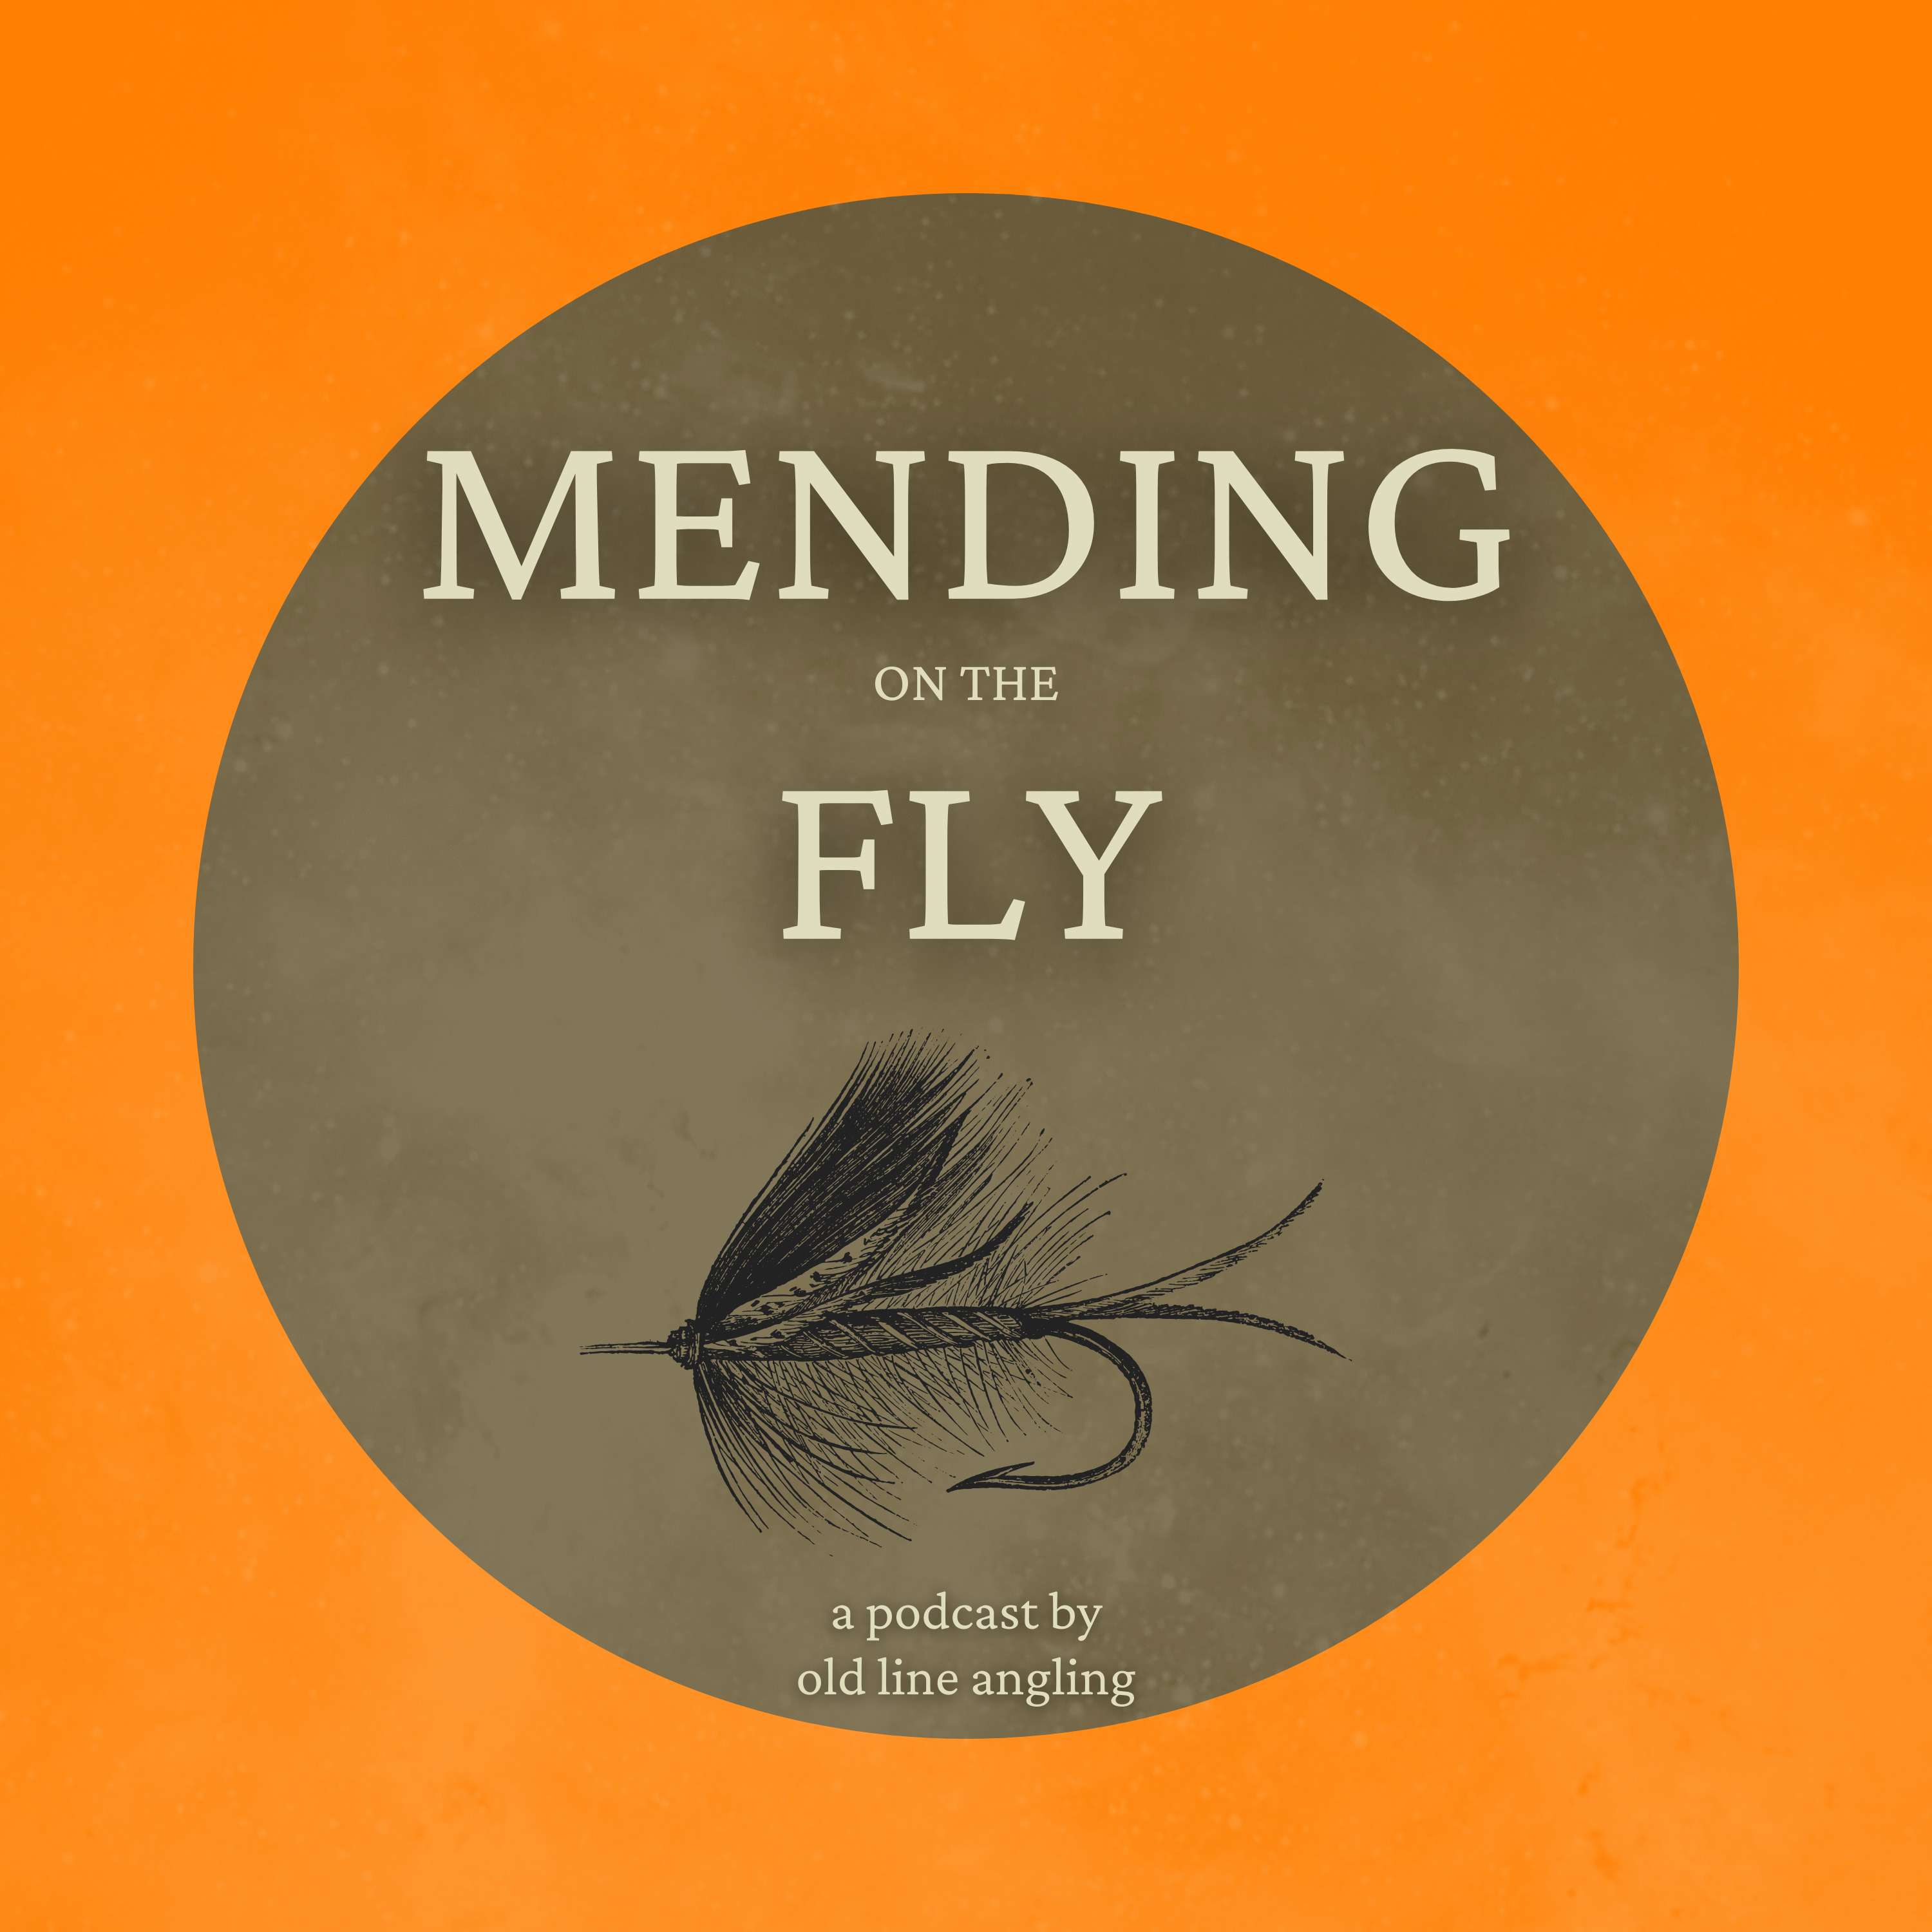 Mending on the Fly